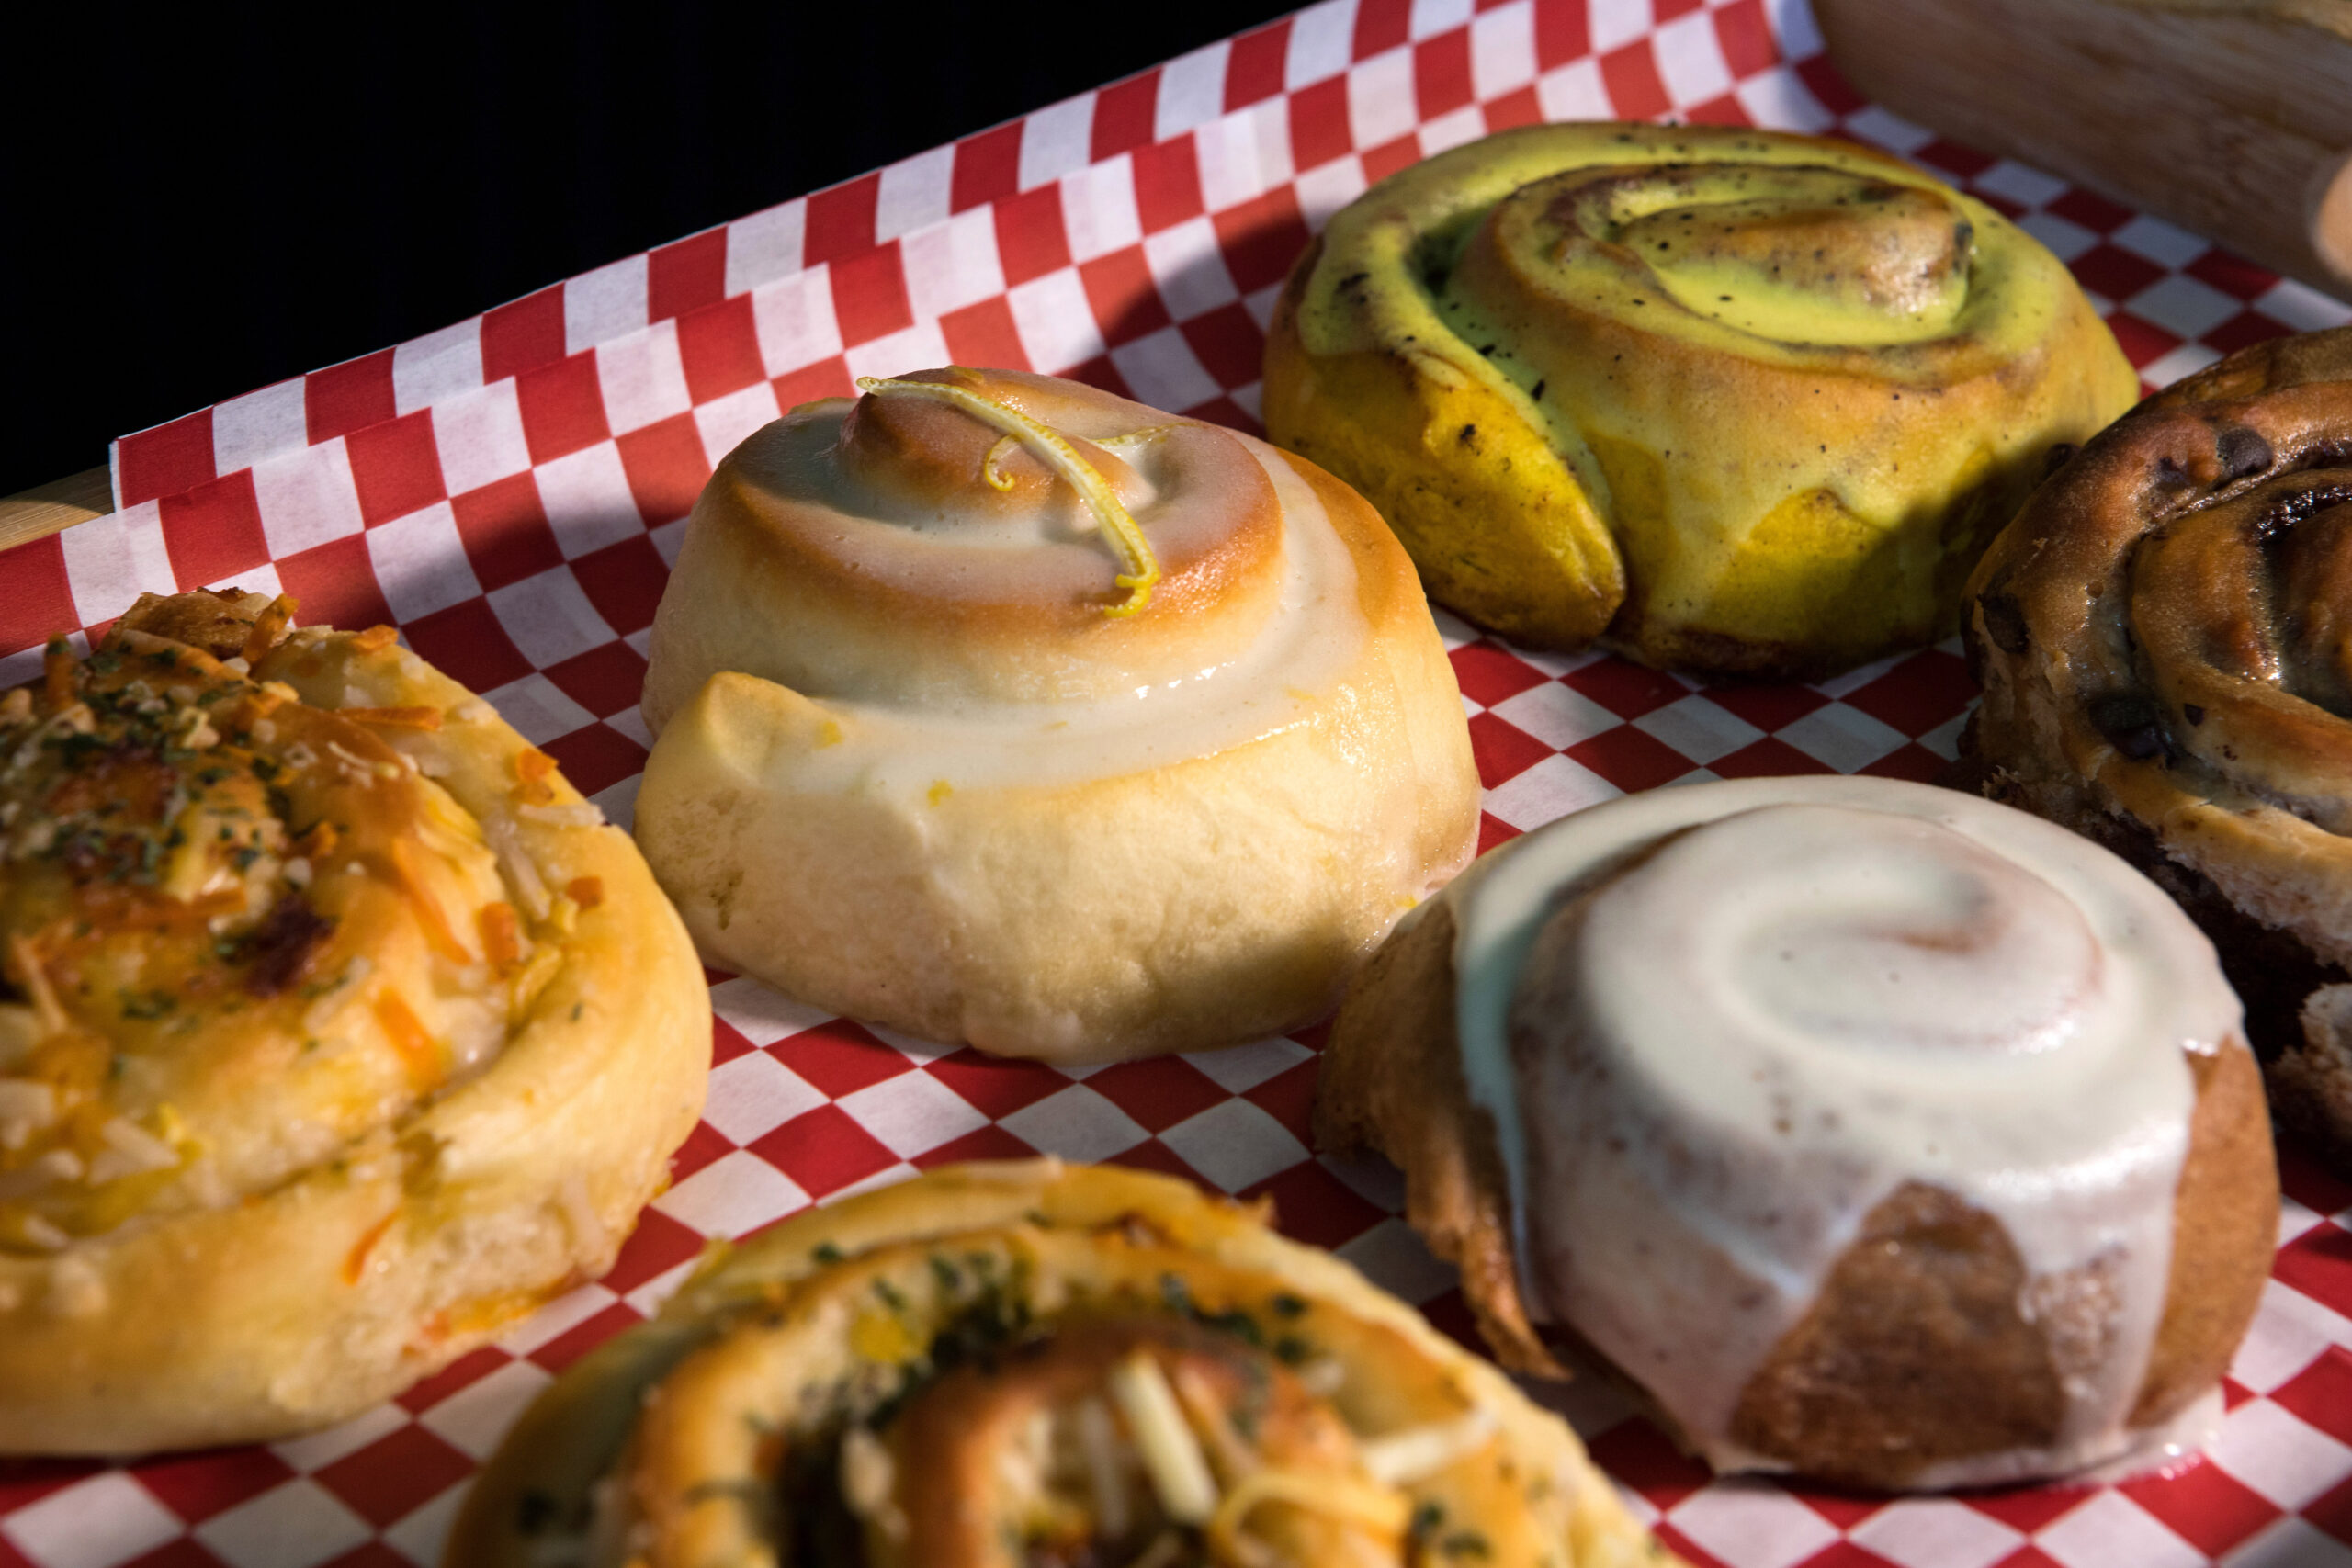 A Lemon roll with lemon frosting, is top center, next to other sweet and savory treats, at Magdelena's Savories & Sweets, in Petaluma, Calif., on Saturday, February 19, 2022. (Photo by Darryl Bush / For The Press Democrat)